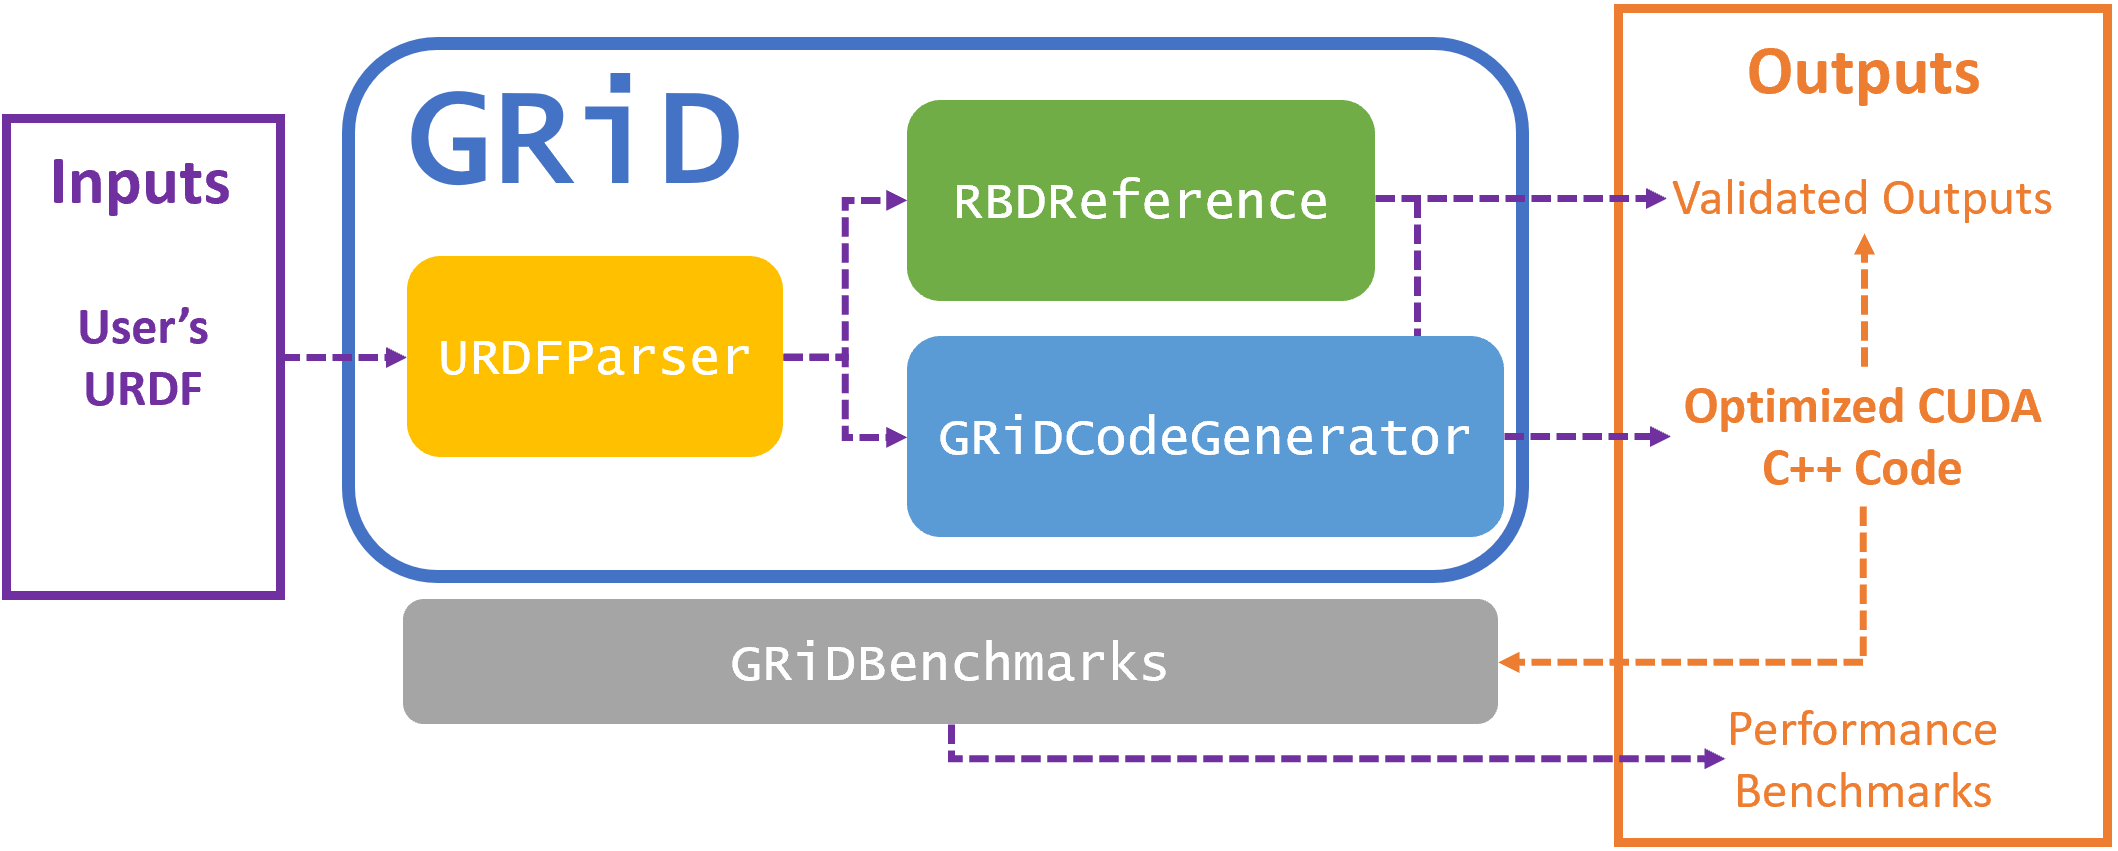 The GRiD library package ecosystem, showing how a user's URDF file can be transformed into optimized CUDA C++ code which can then be validated against reference outputs and benchmarked for performance.